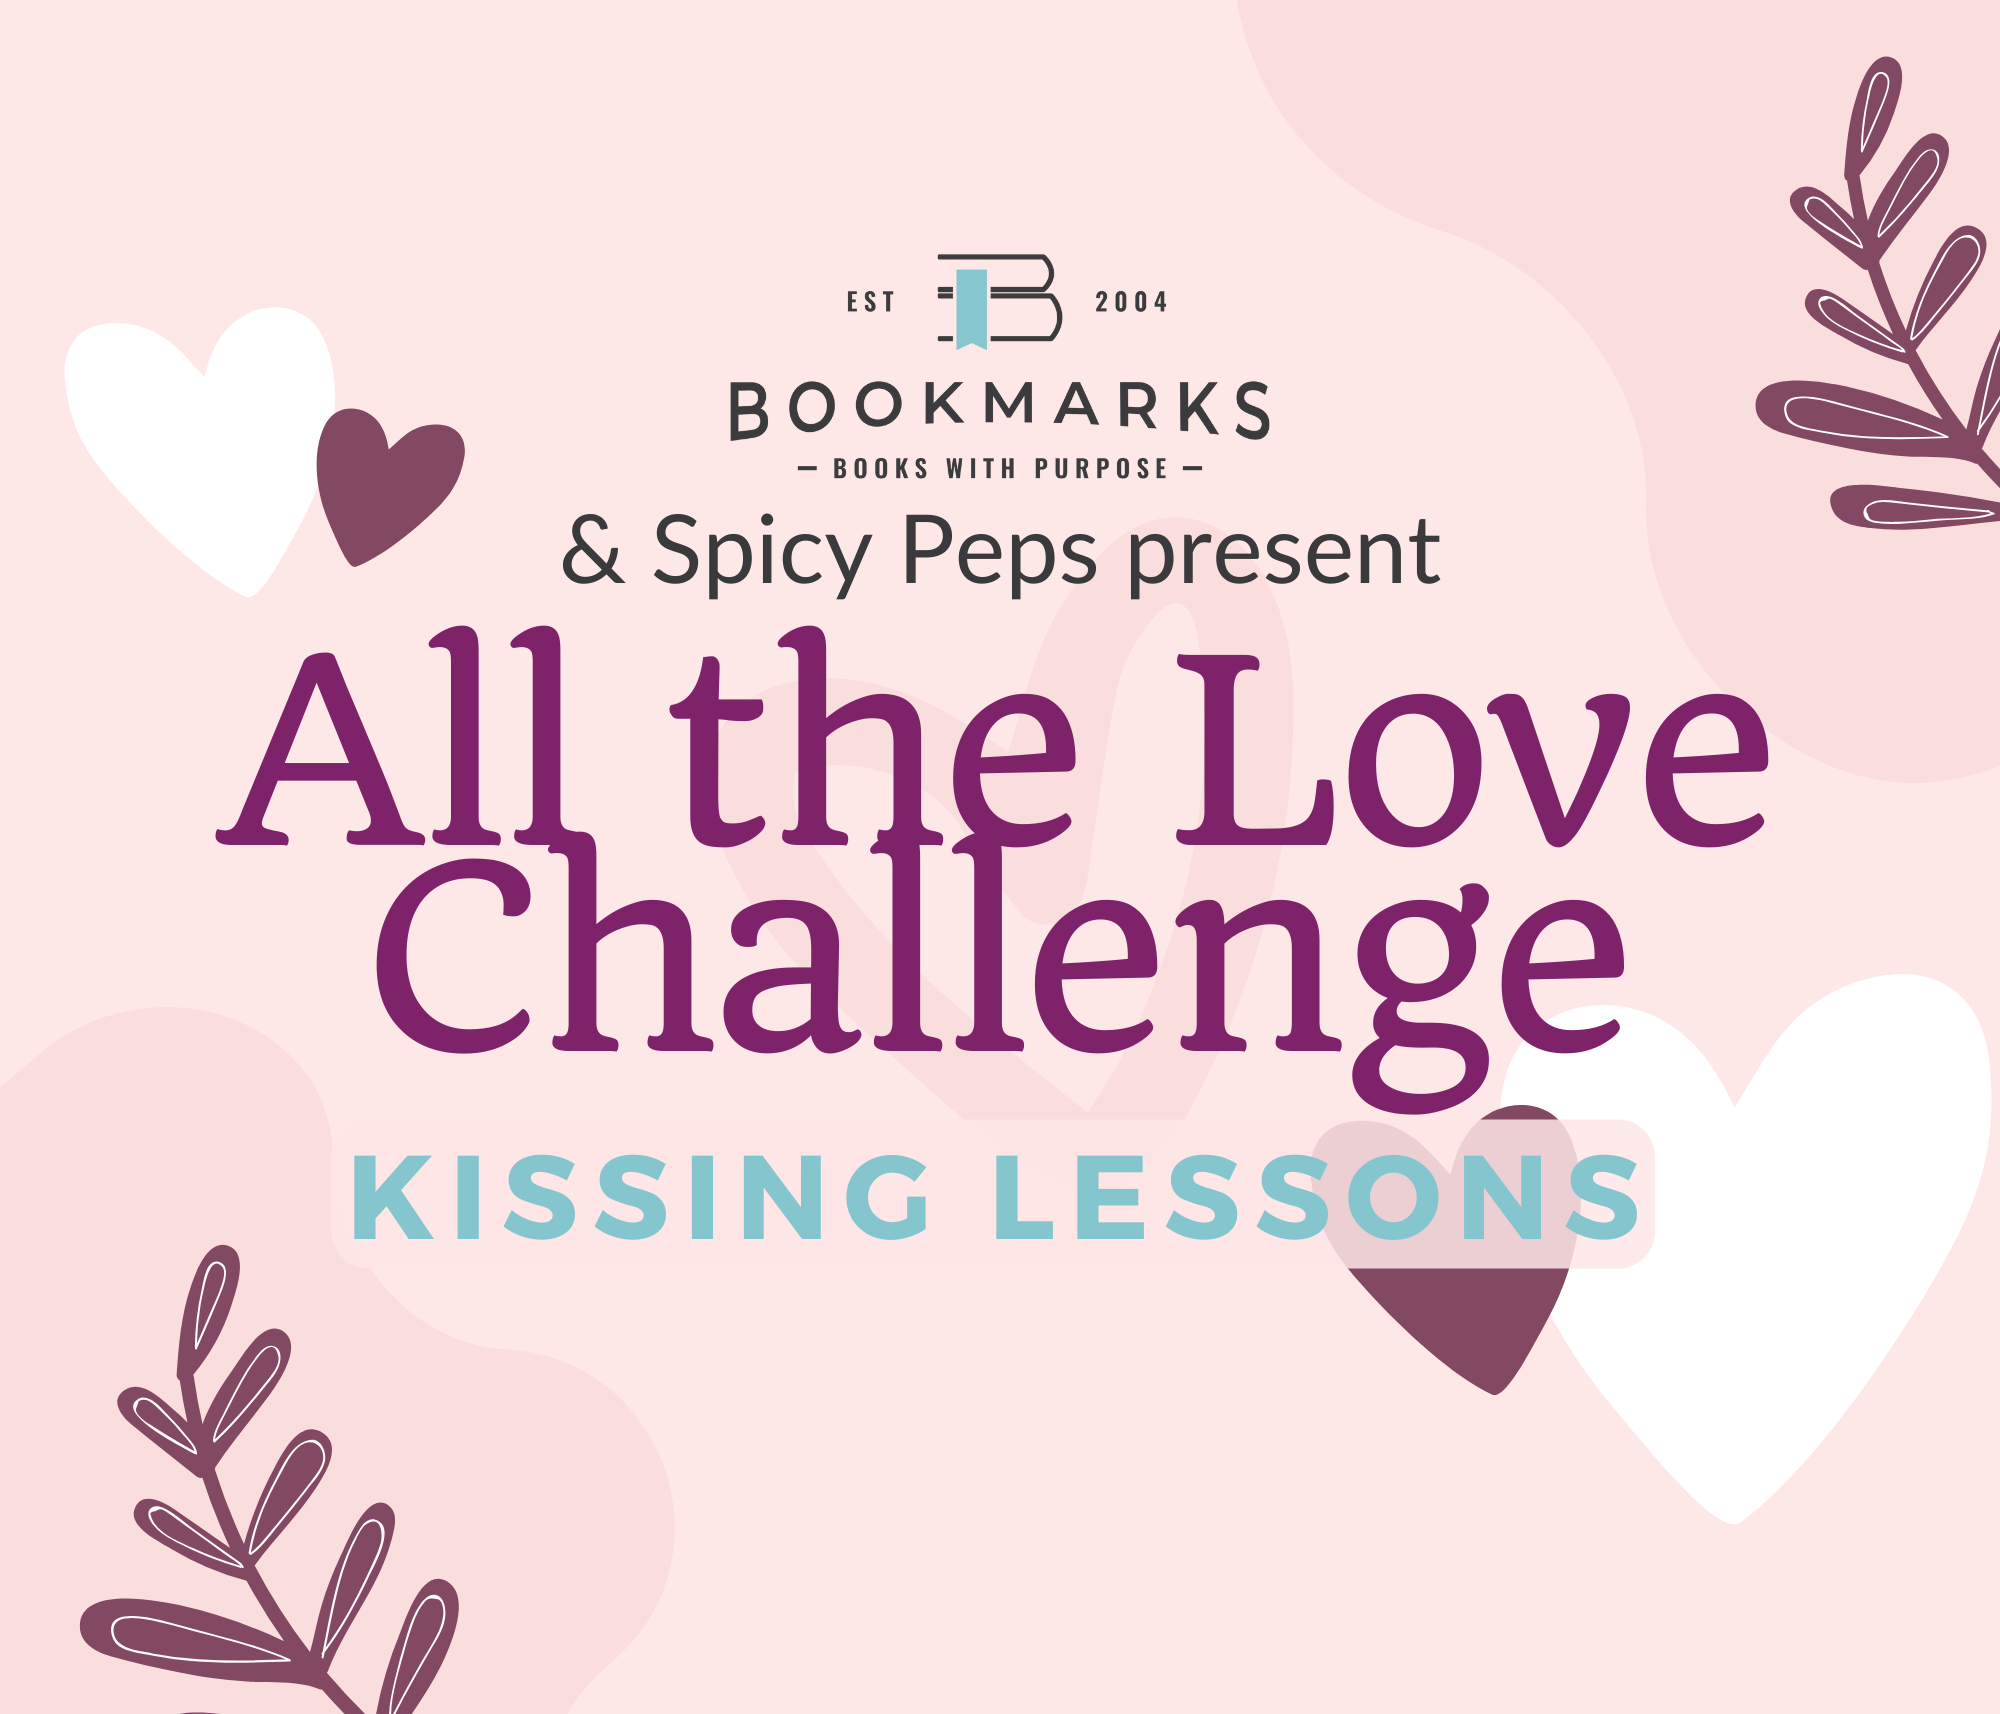 All the Love: Kissing Lessons